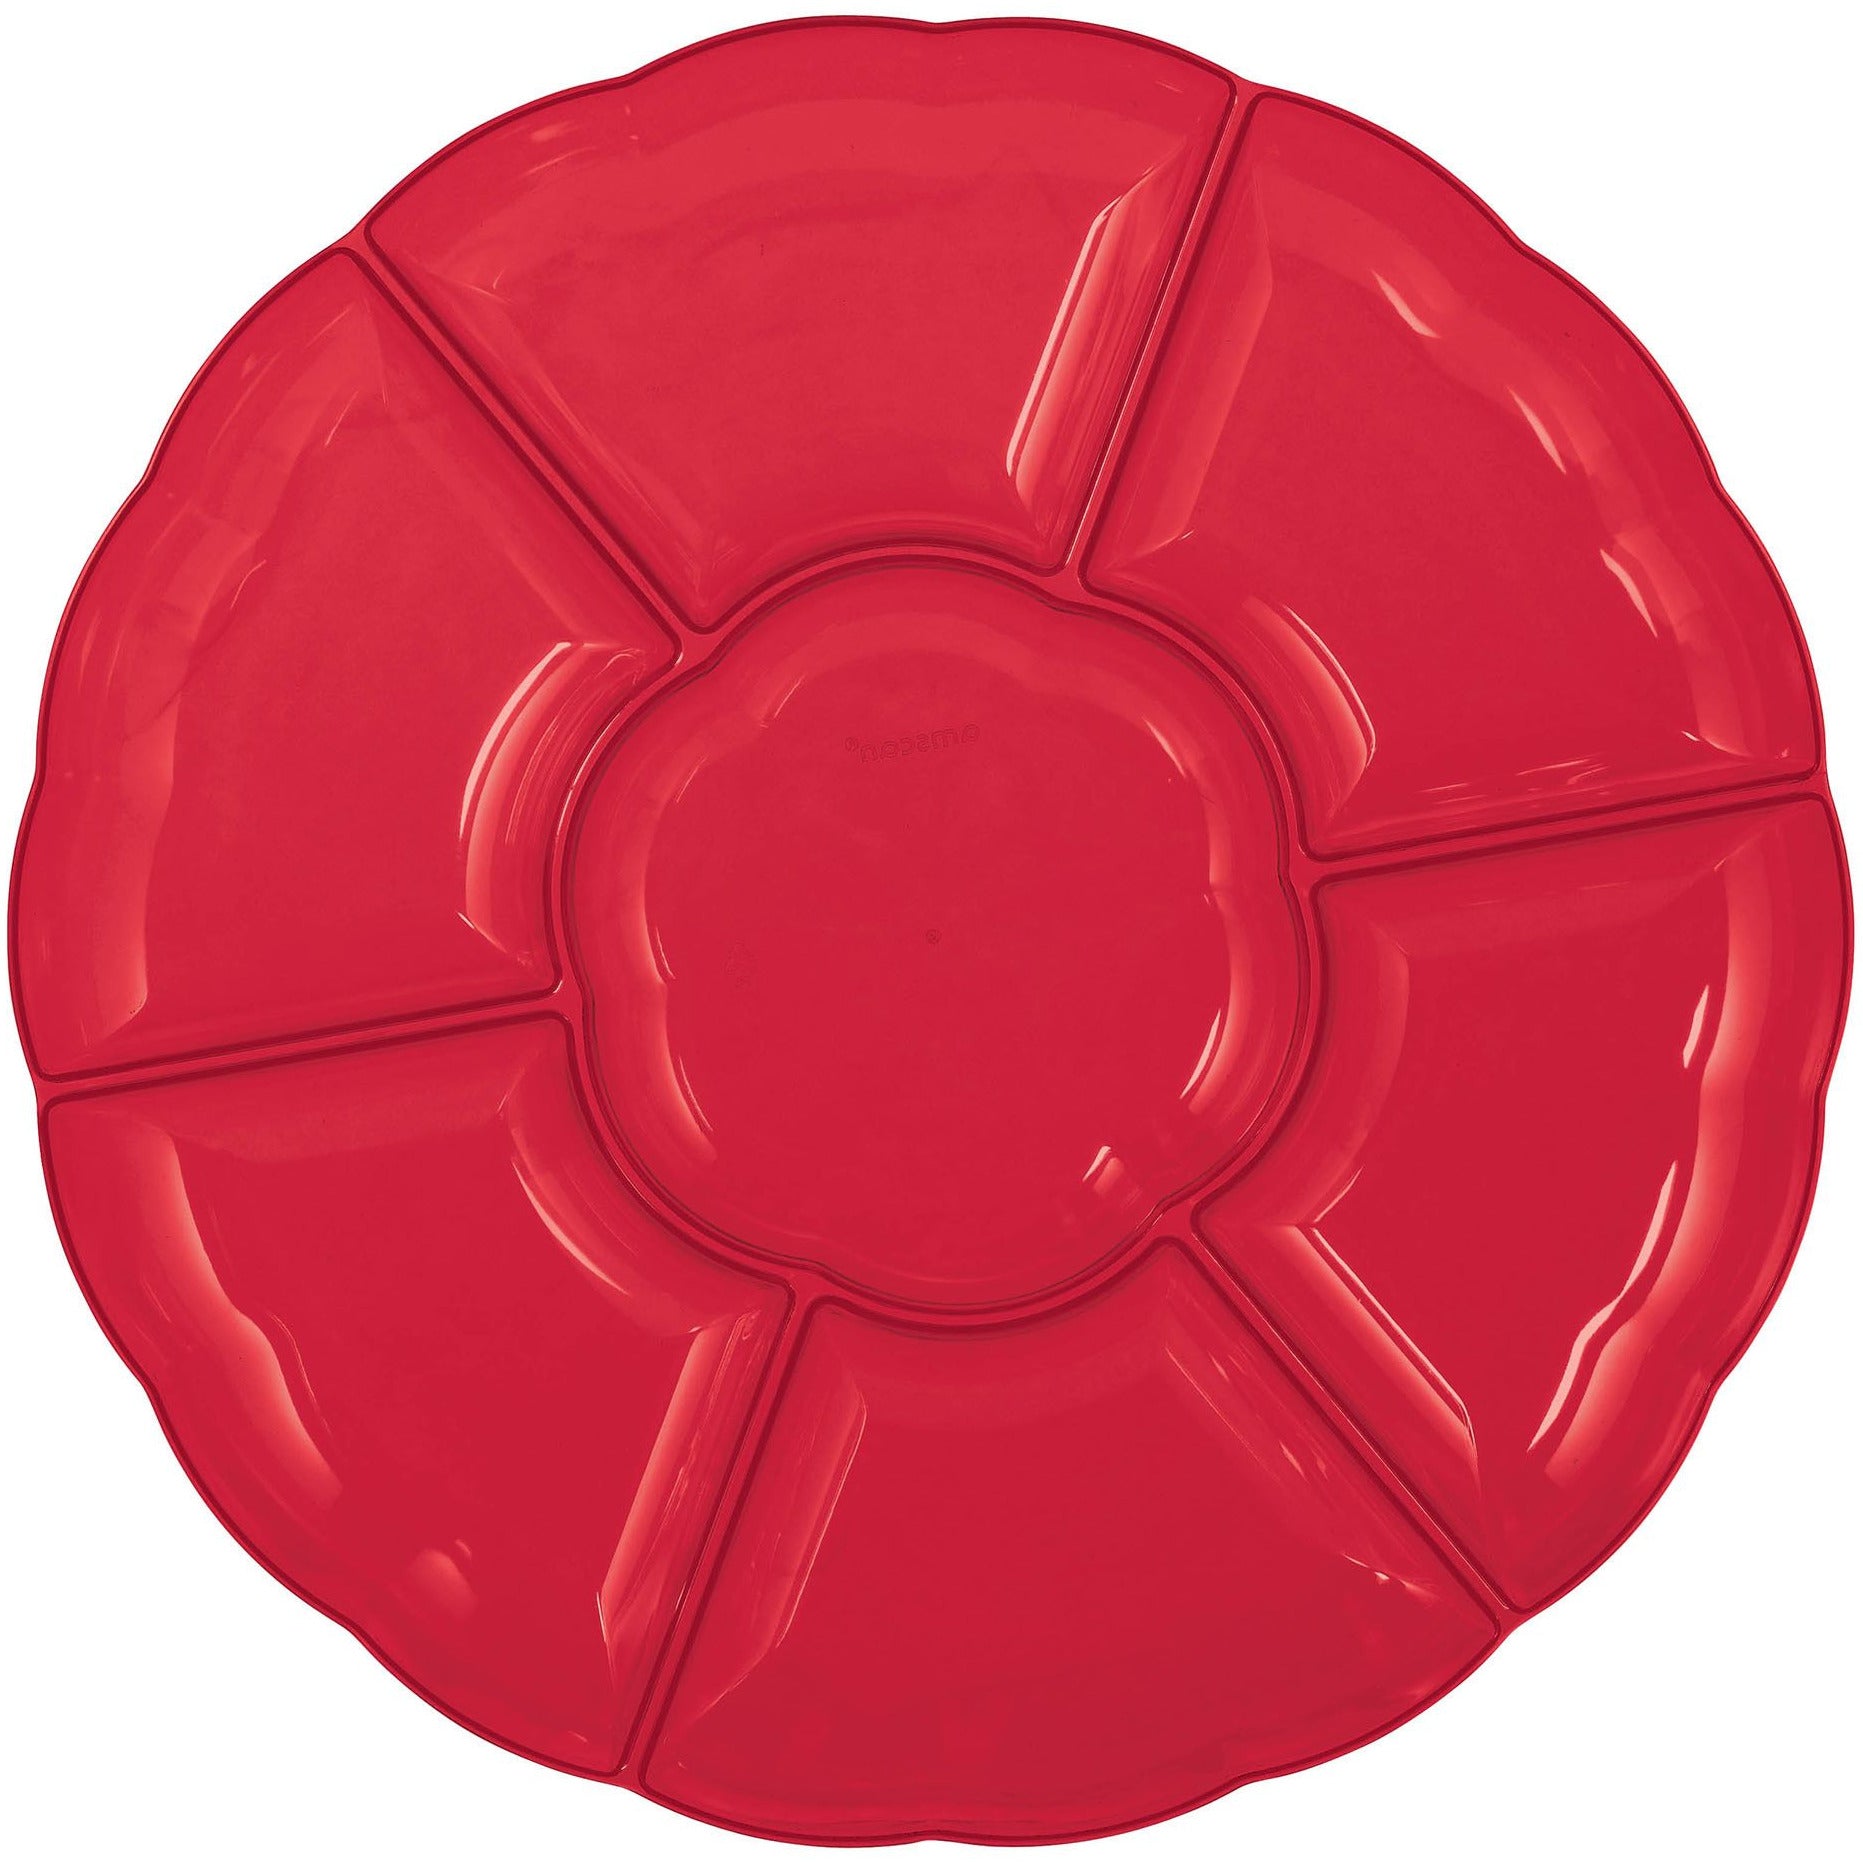 Amscan 16" Compartment Chip & Dip Tray - Apple Red